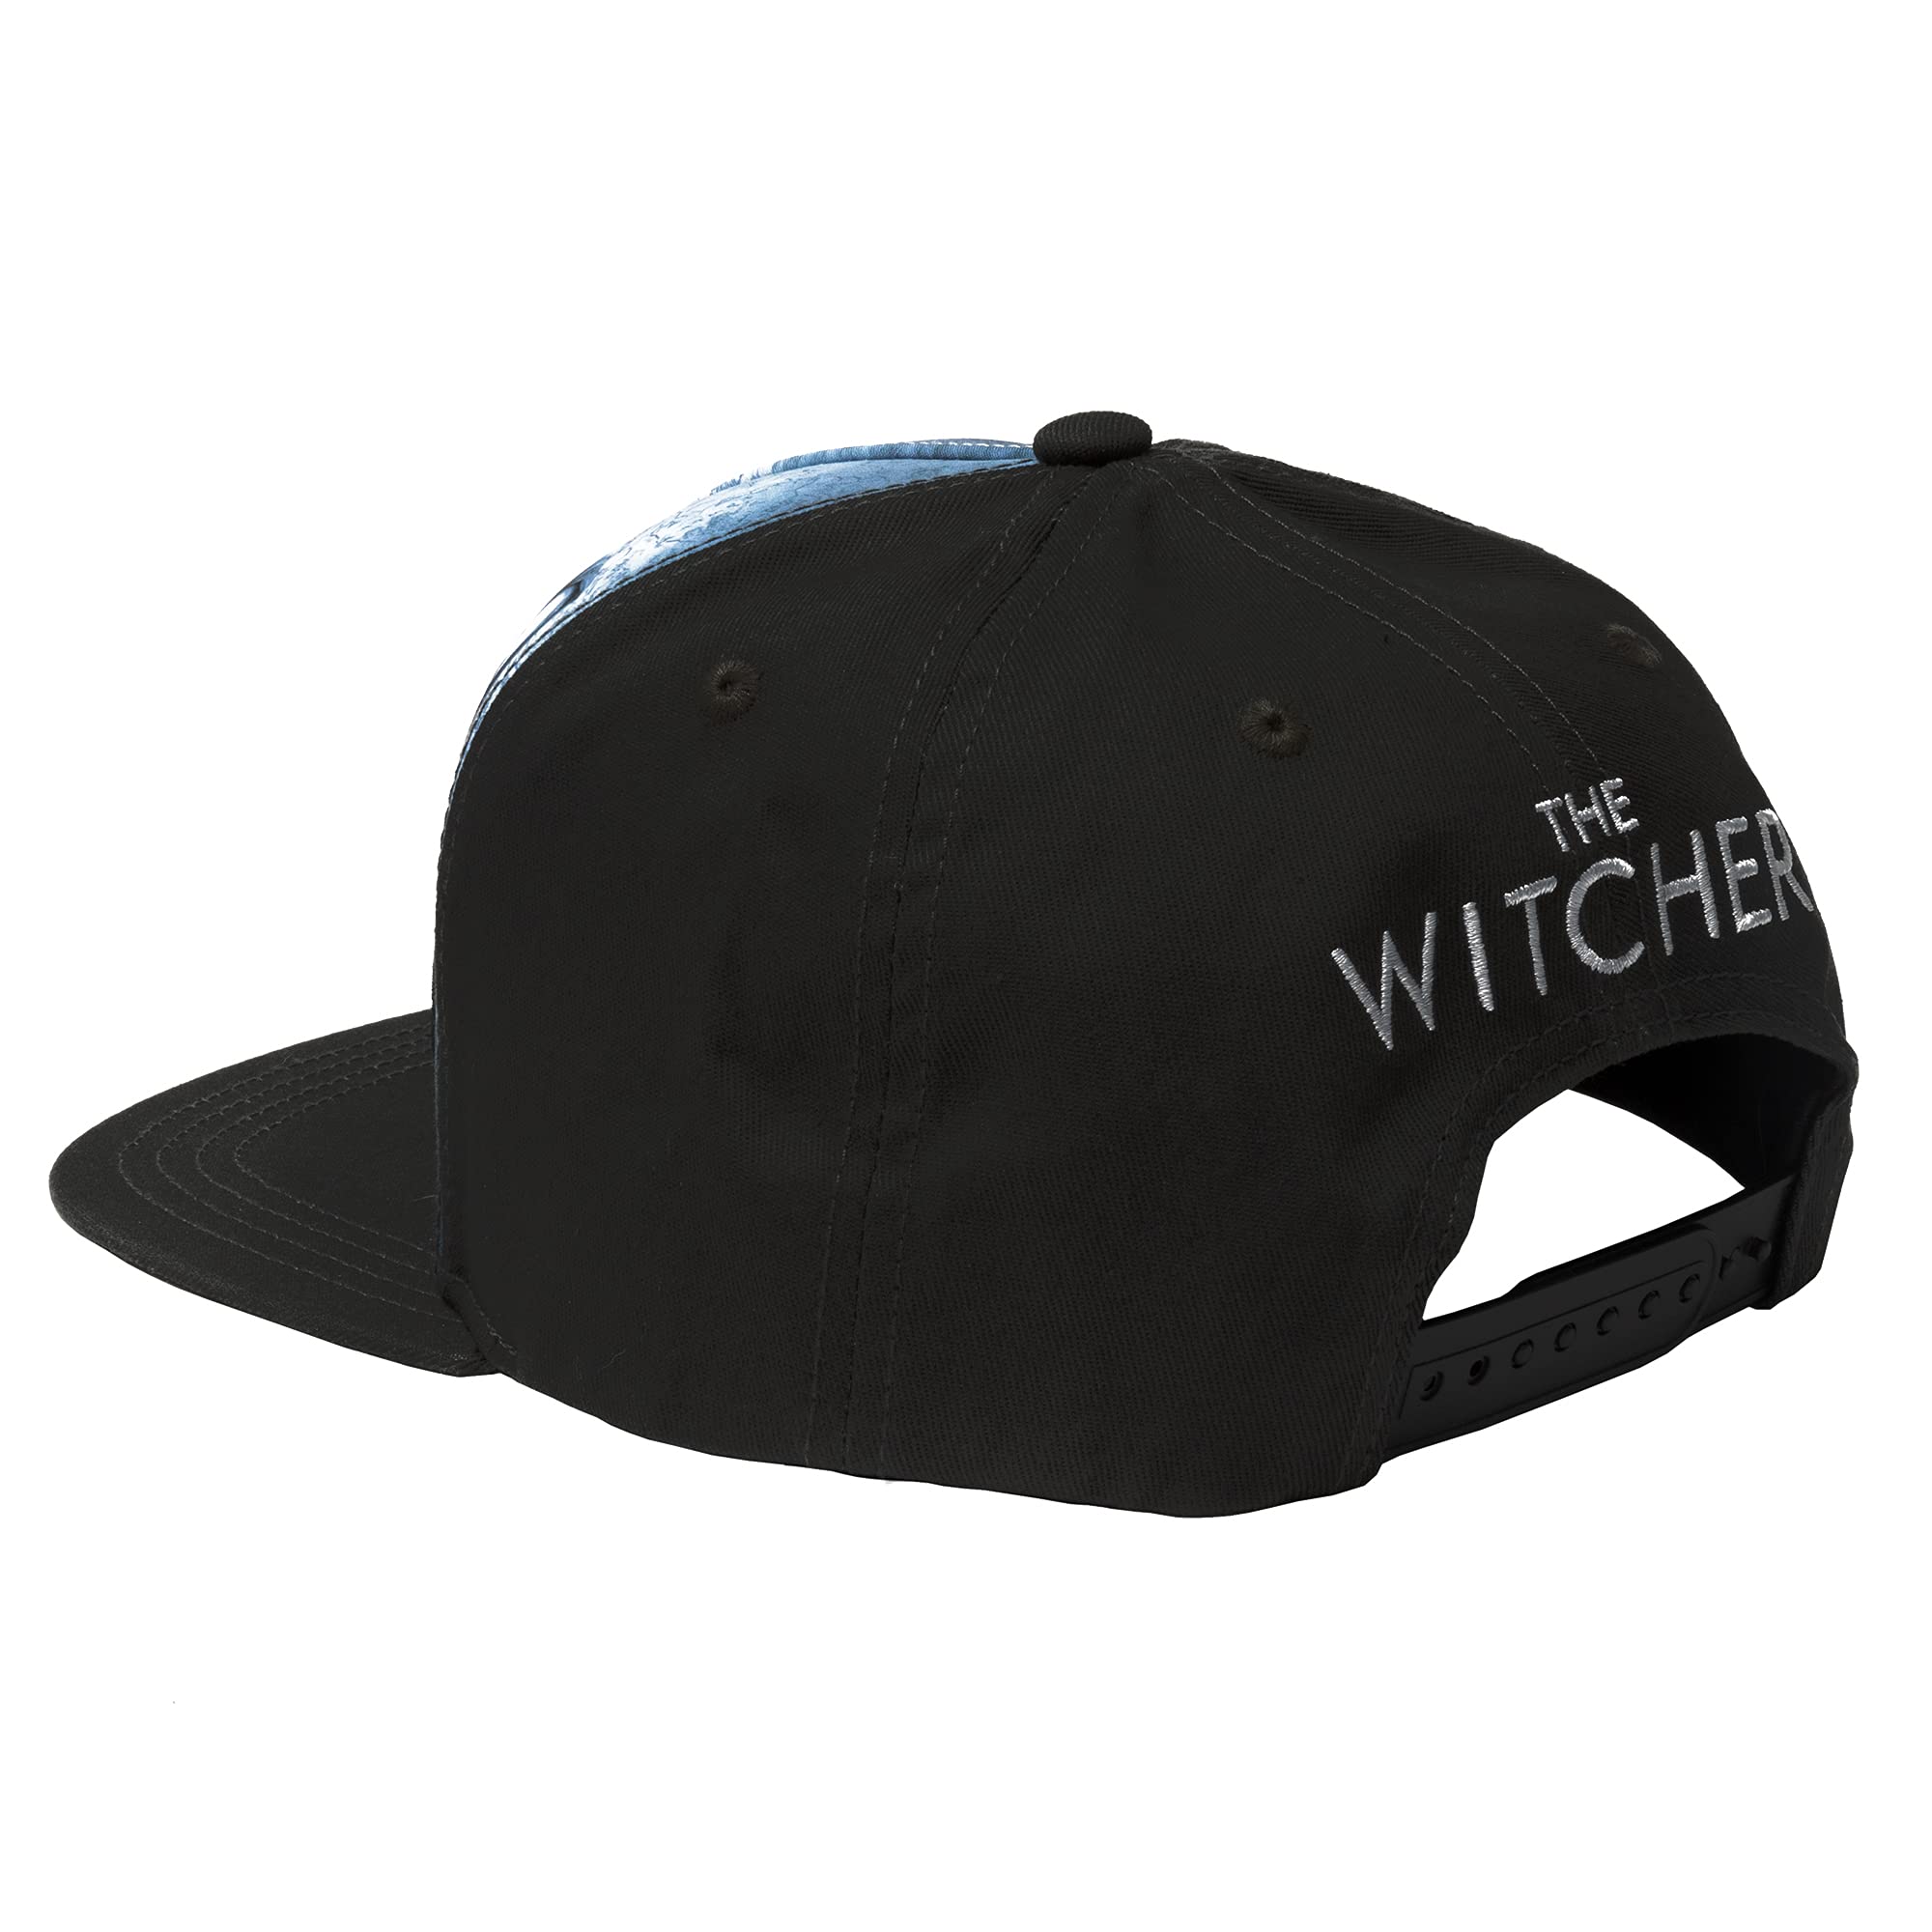 The Witcher End of The Journey Snapback Baseball Hat, Black, Adult Size